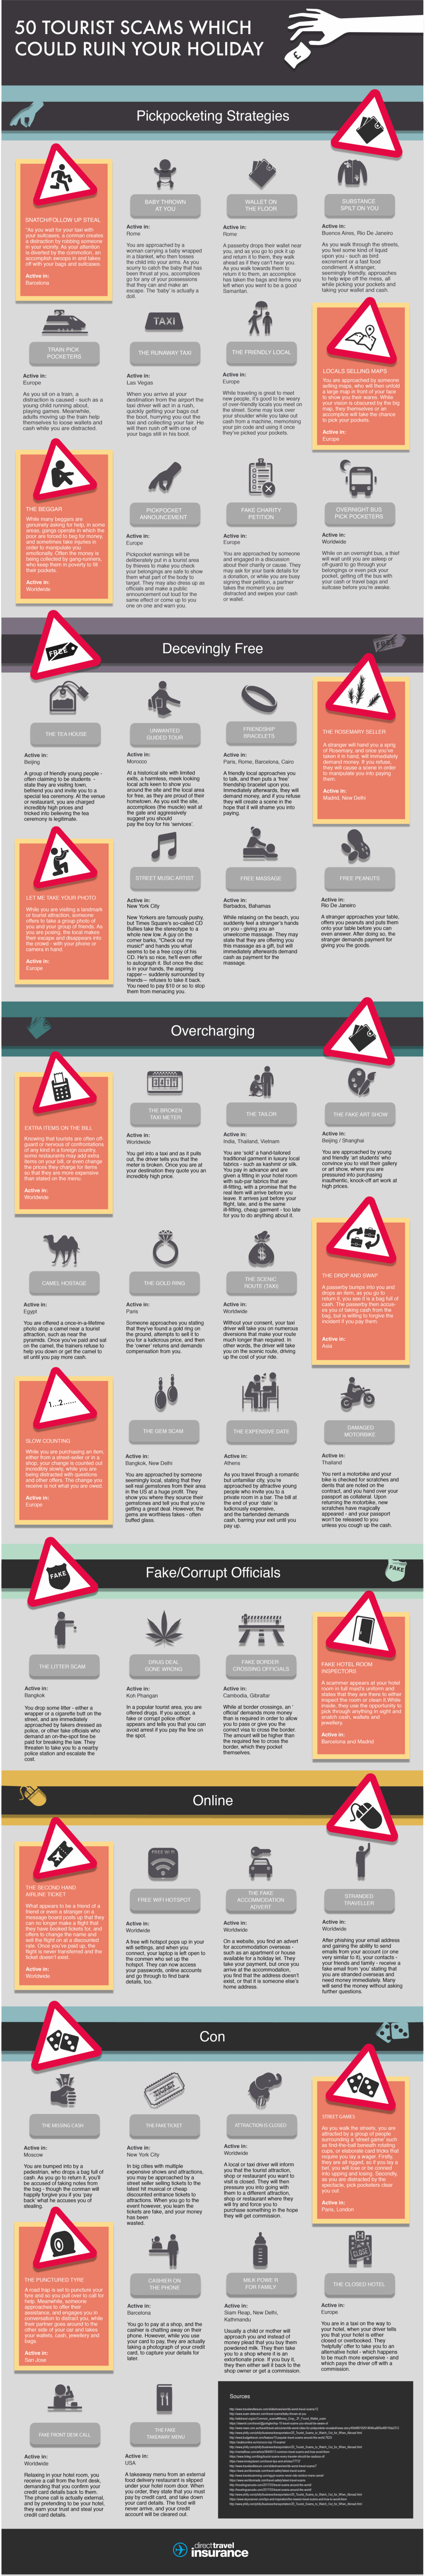 Direct Travel Tourist Scams Which Could Ruin Your Holiday Infographic